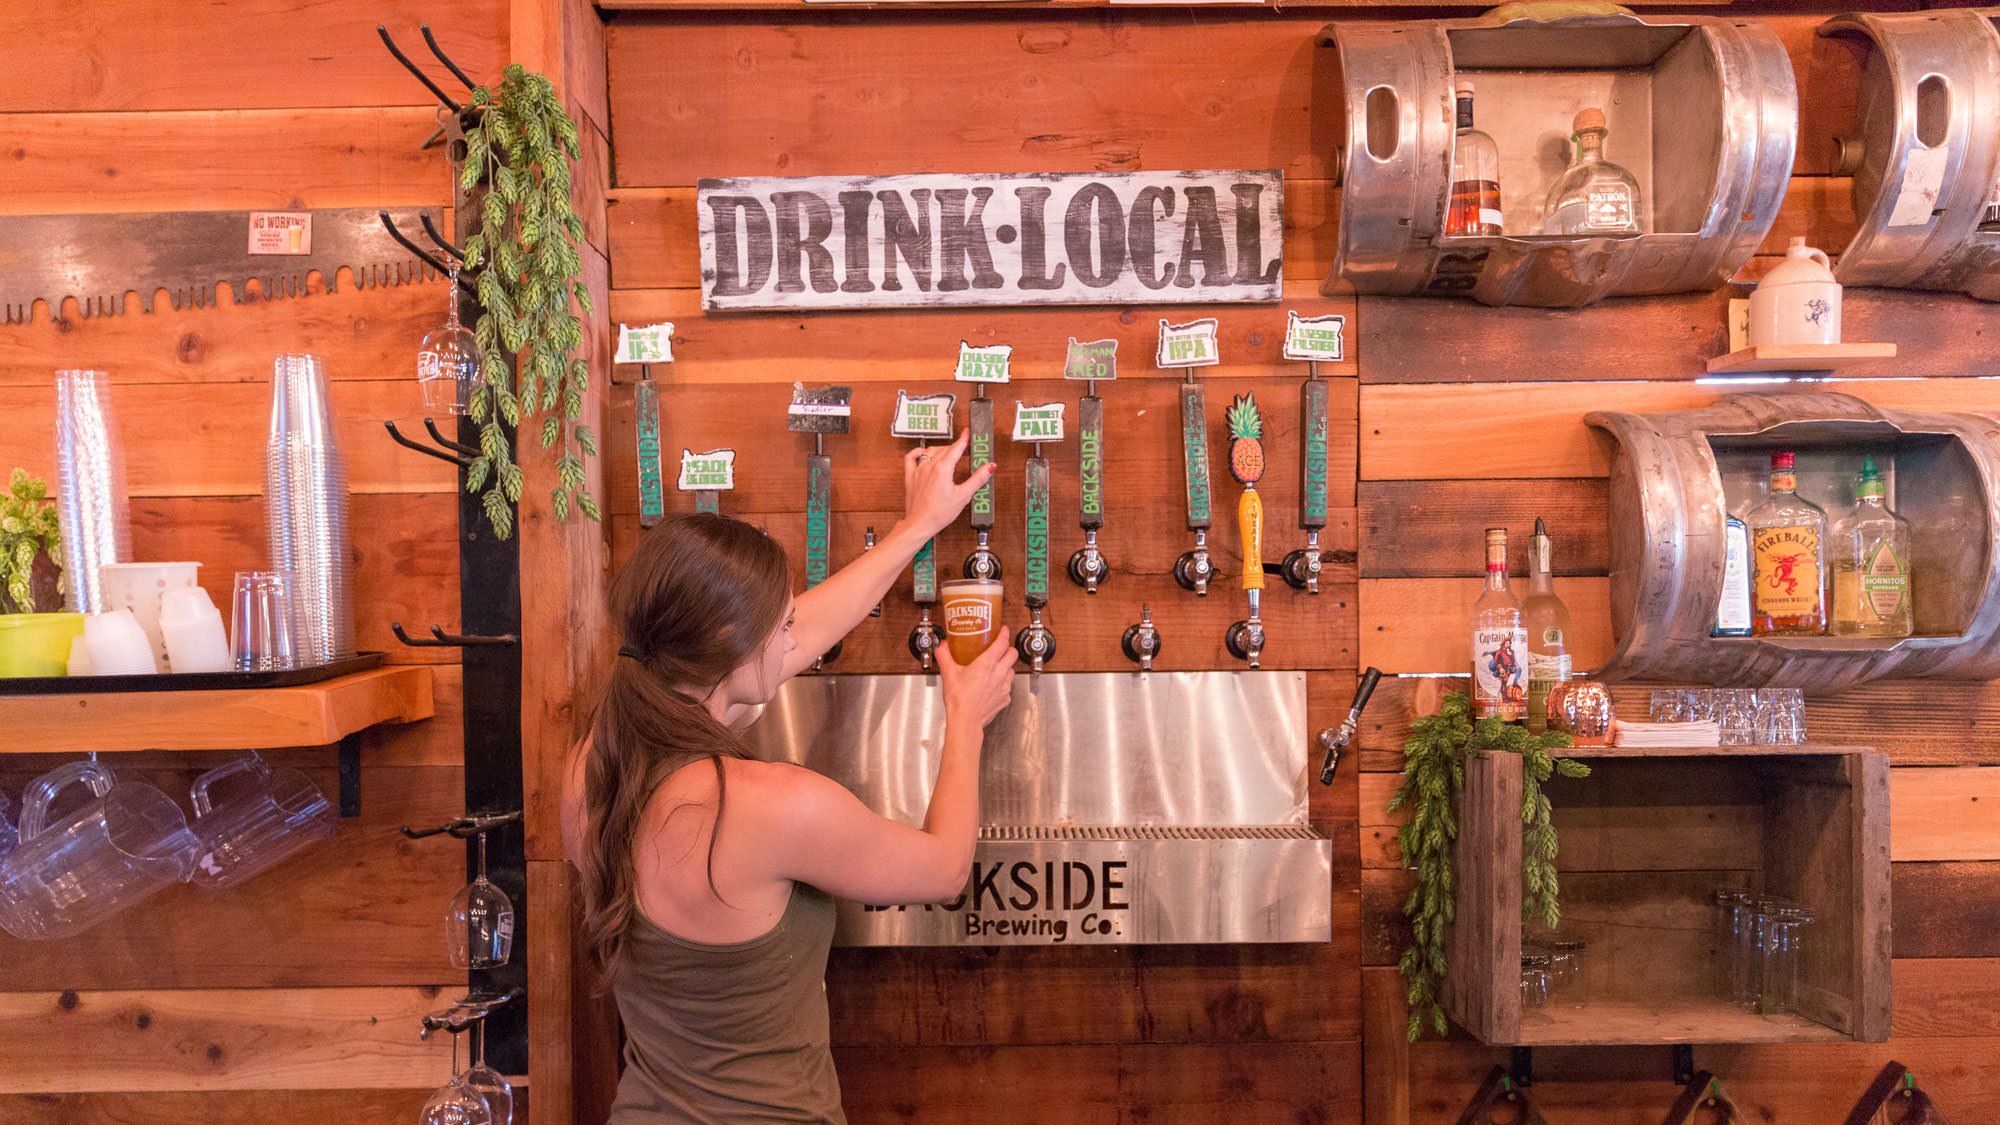 A bartender pours beer under a "drink local" sign at Backside Brewing, one of the stops on the Great Umpqua Food Trail.